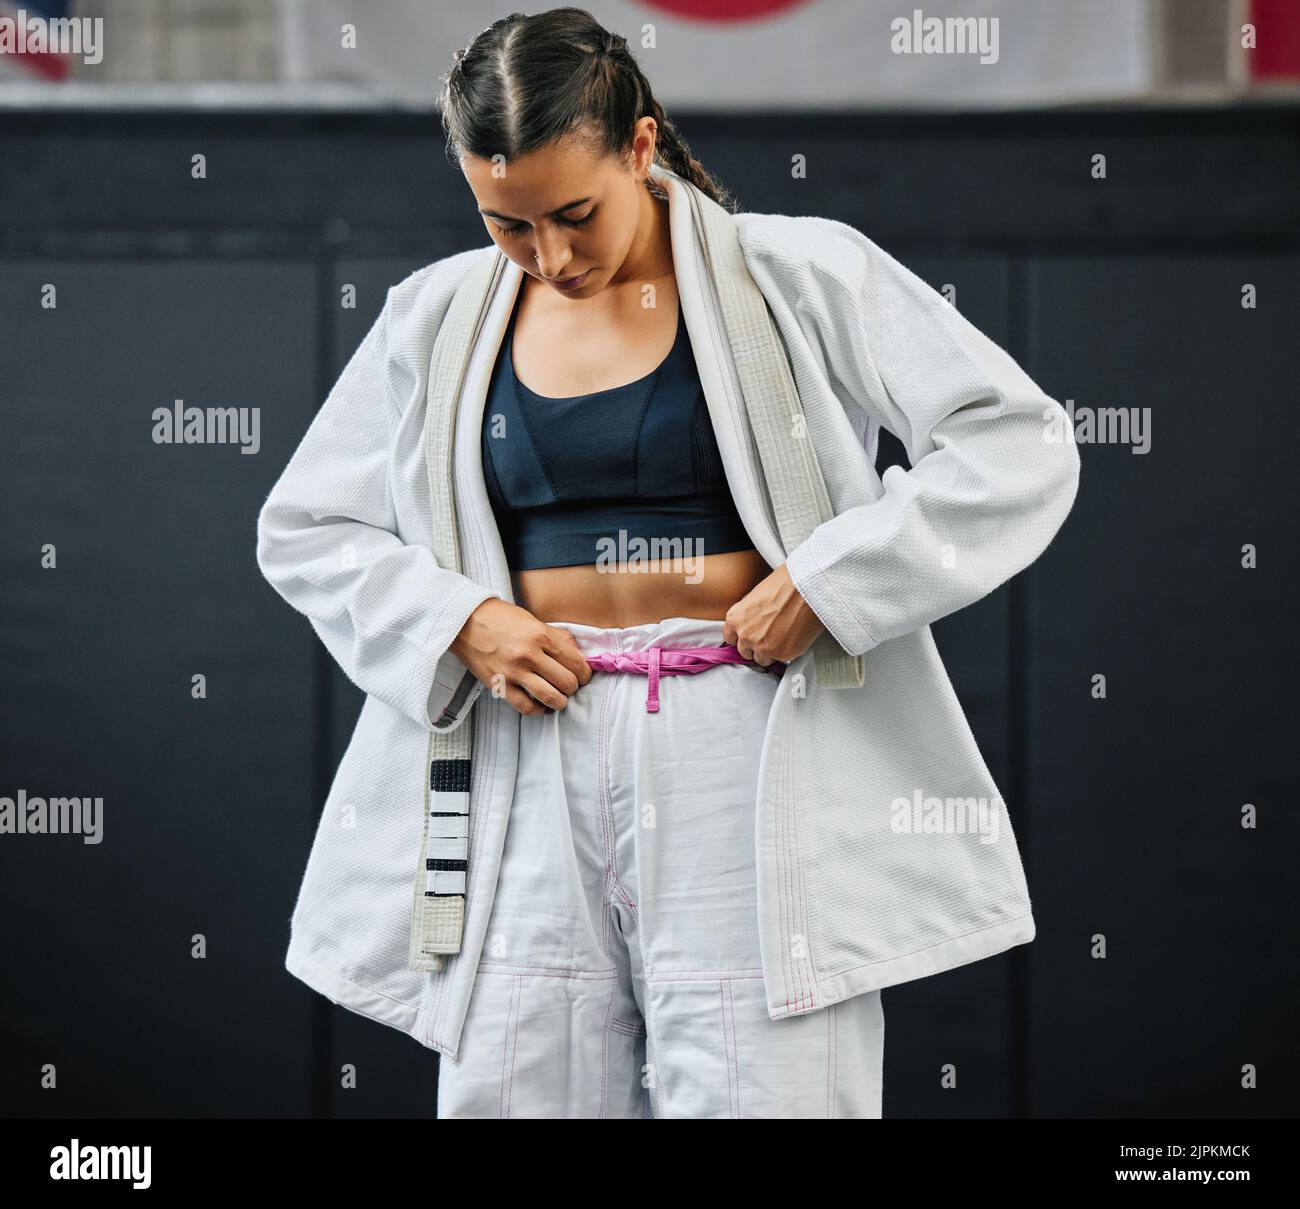 . Karate woman ready for fitness workout at gym, learning at a sport club and doing training exercise at a wellness school or studio. Female dojo Stock Photo